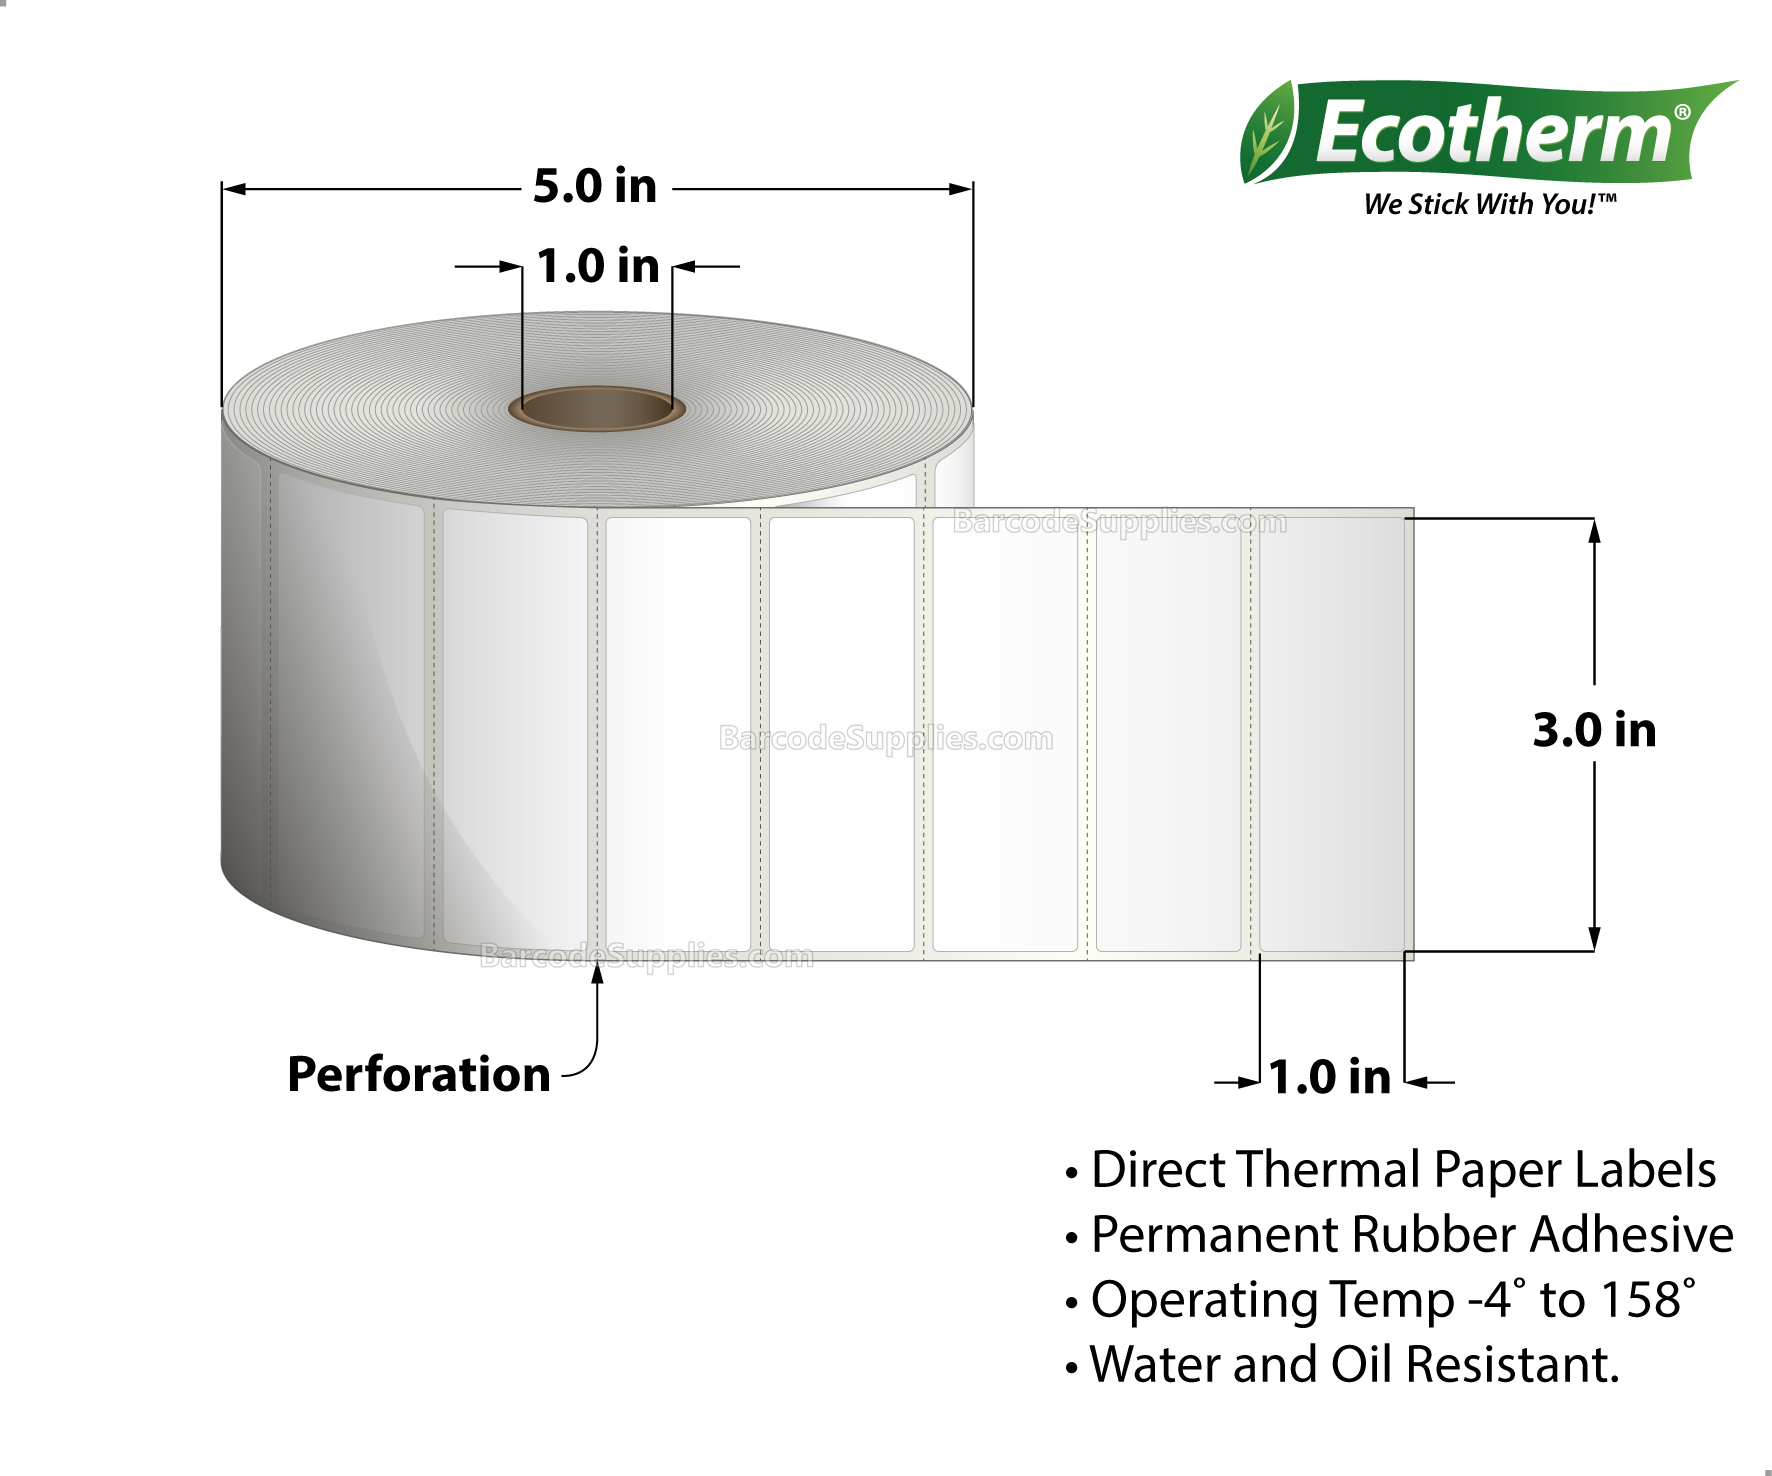 3 x 1 Direct Thermal White Labels With Rubber Adhesive - Perforated - 2500 Labels Per Roll - Carton Of 6 Rolls - 15000 Labels Total - MPN: ECOTHERM15137-6